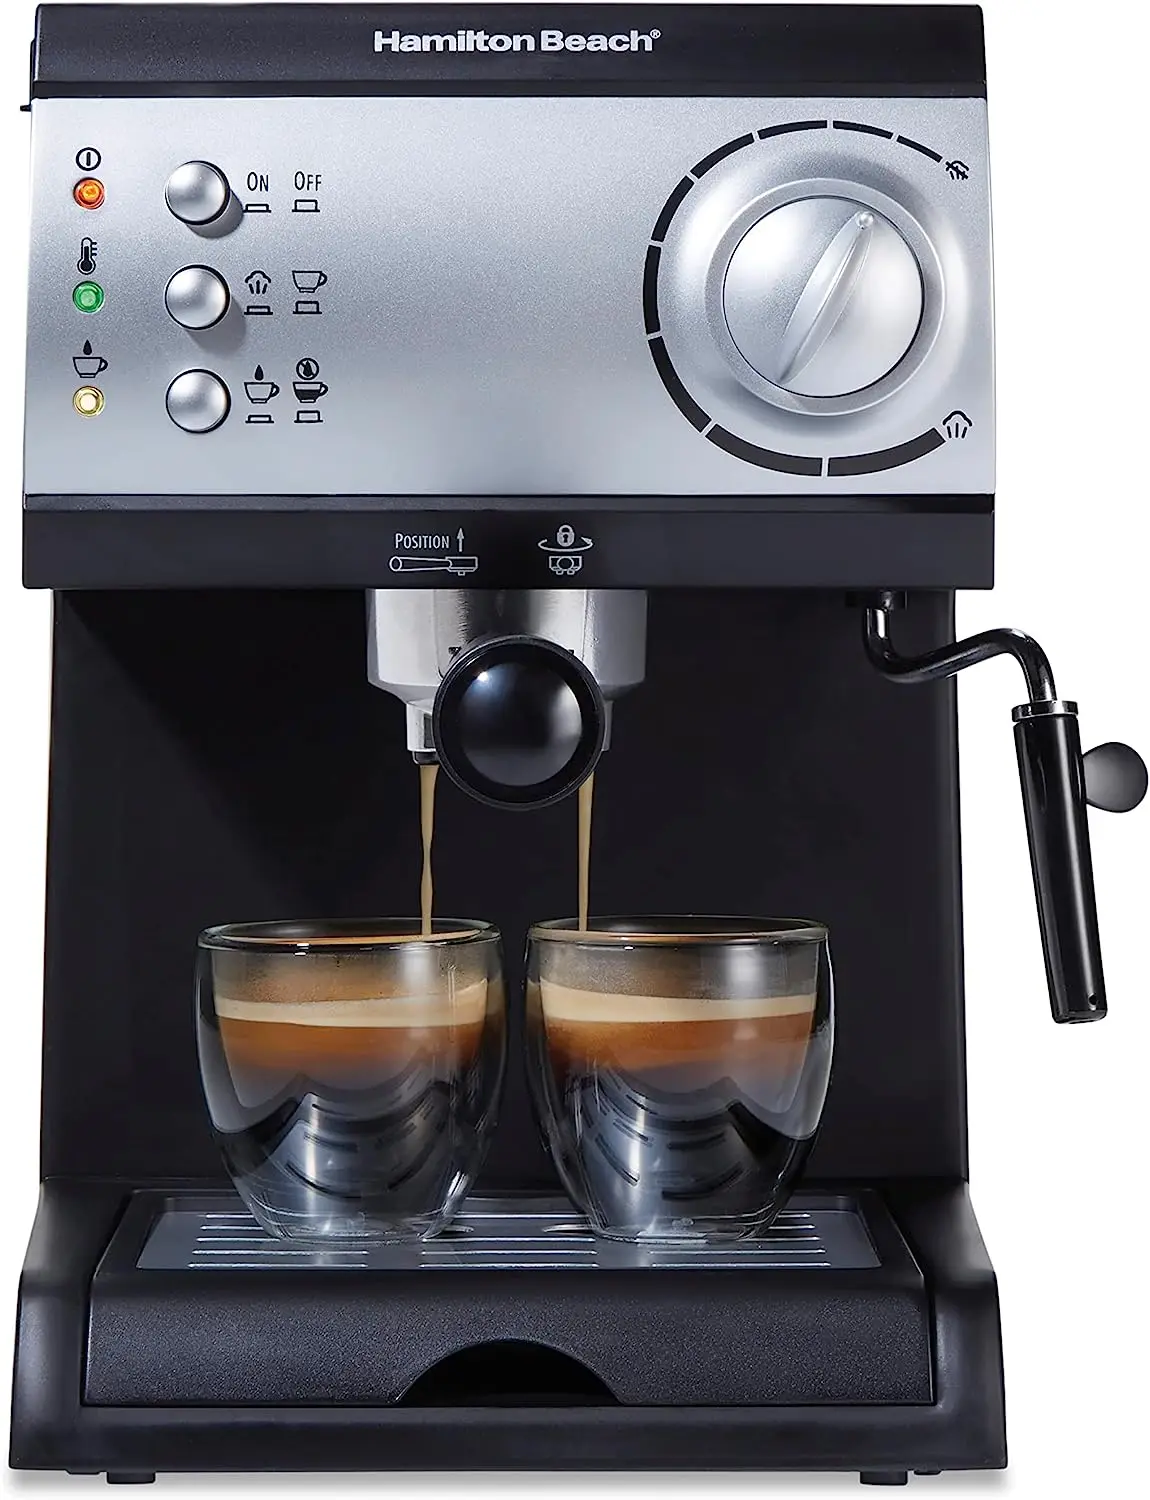 

15 Espresso Machine, Cappuccino, Mocha, & Latte Maker, with Milk Frother, Make 2 Cups Simultaneously, Works with Pods or Gr